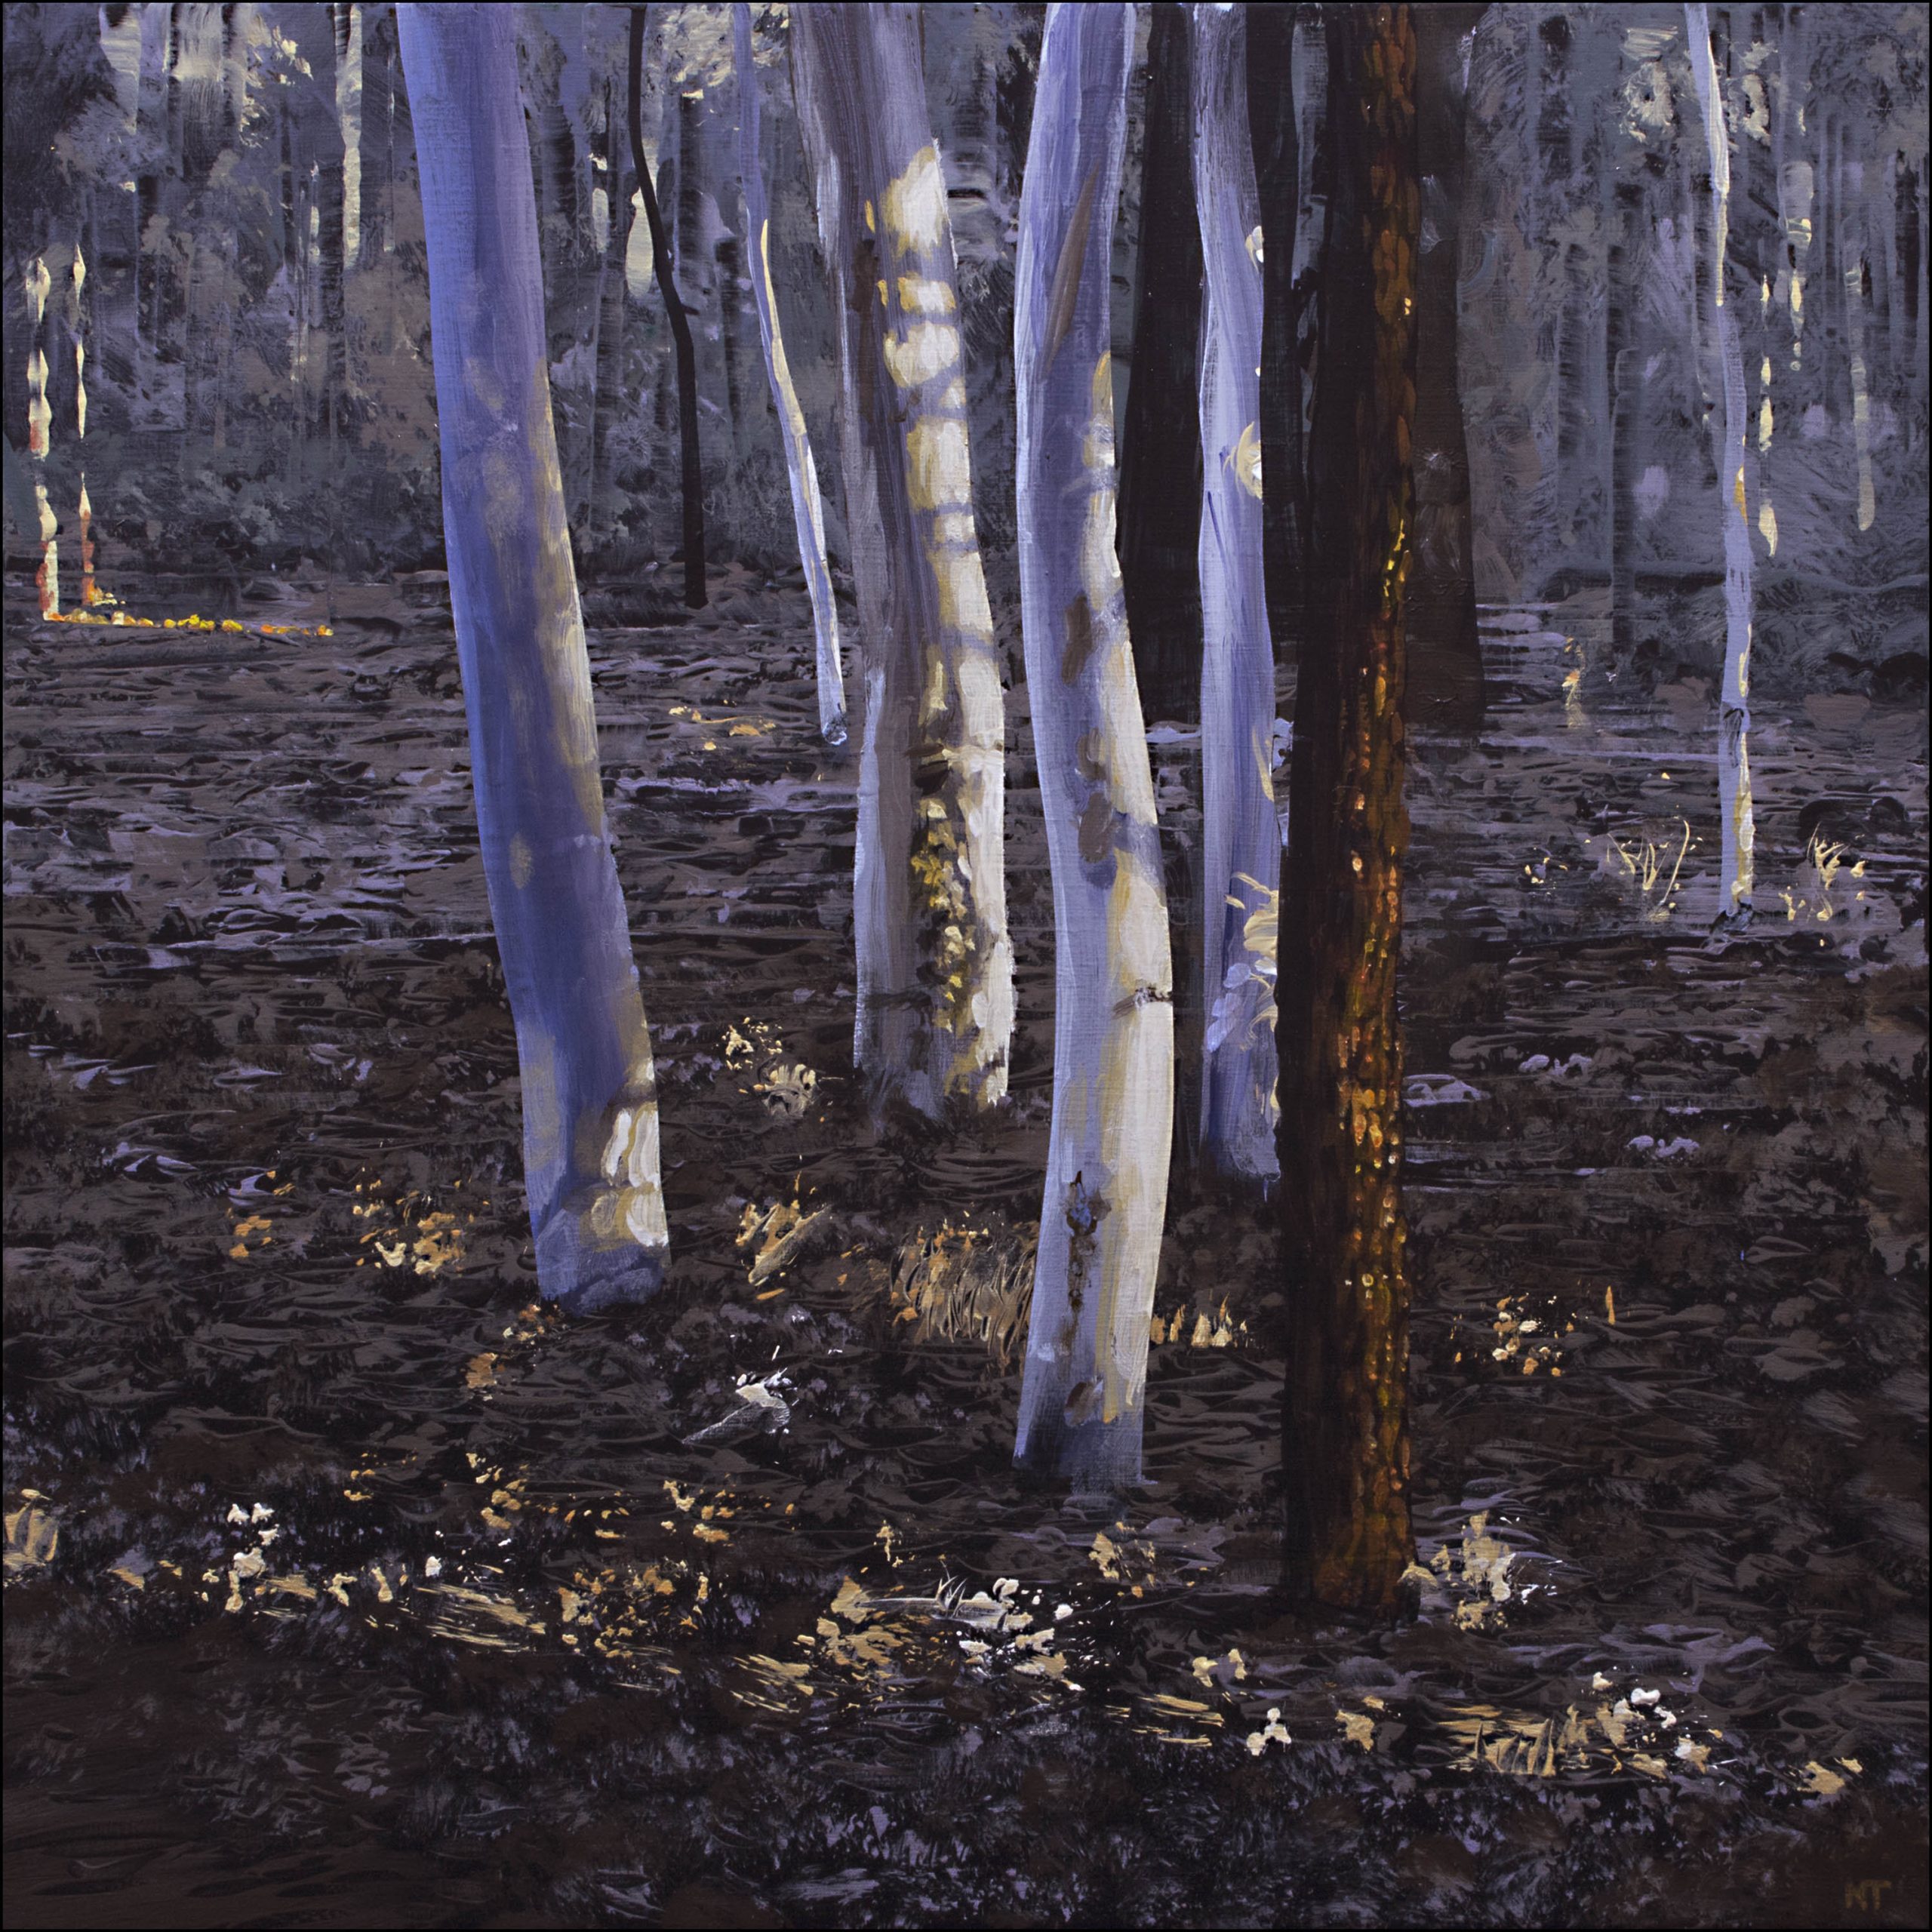 Neil Taylor 'Dawn In The Forest' acrylic on canvas 45 x 45cm $3,900 SOLD